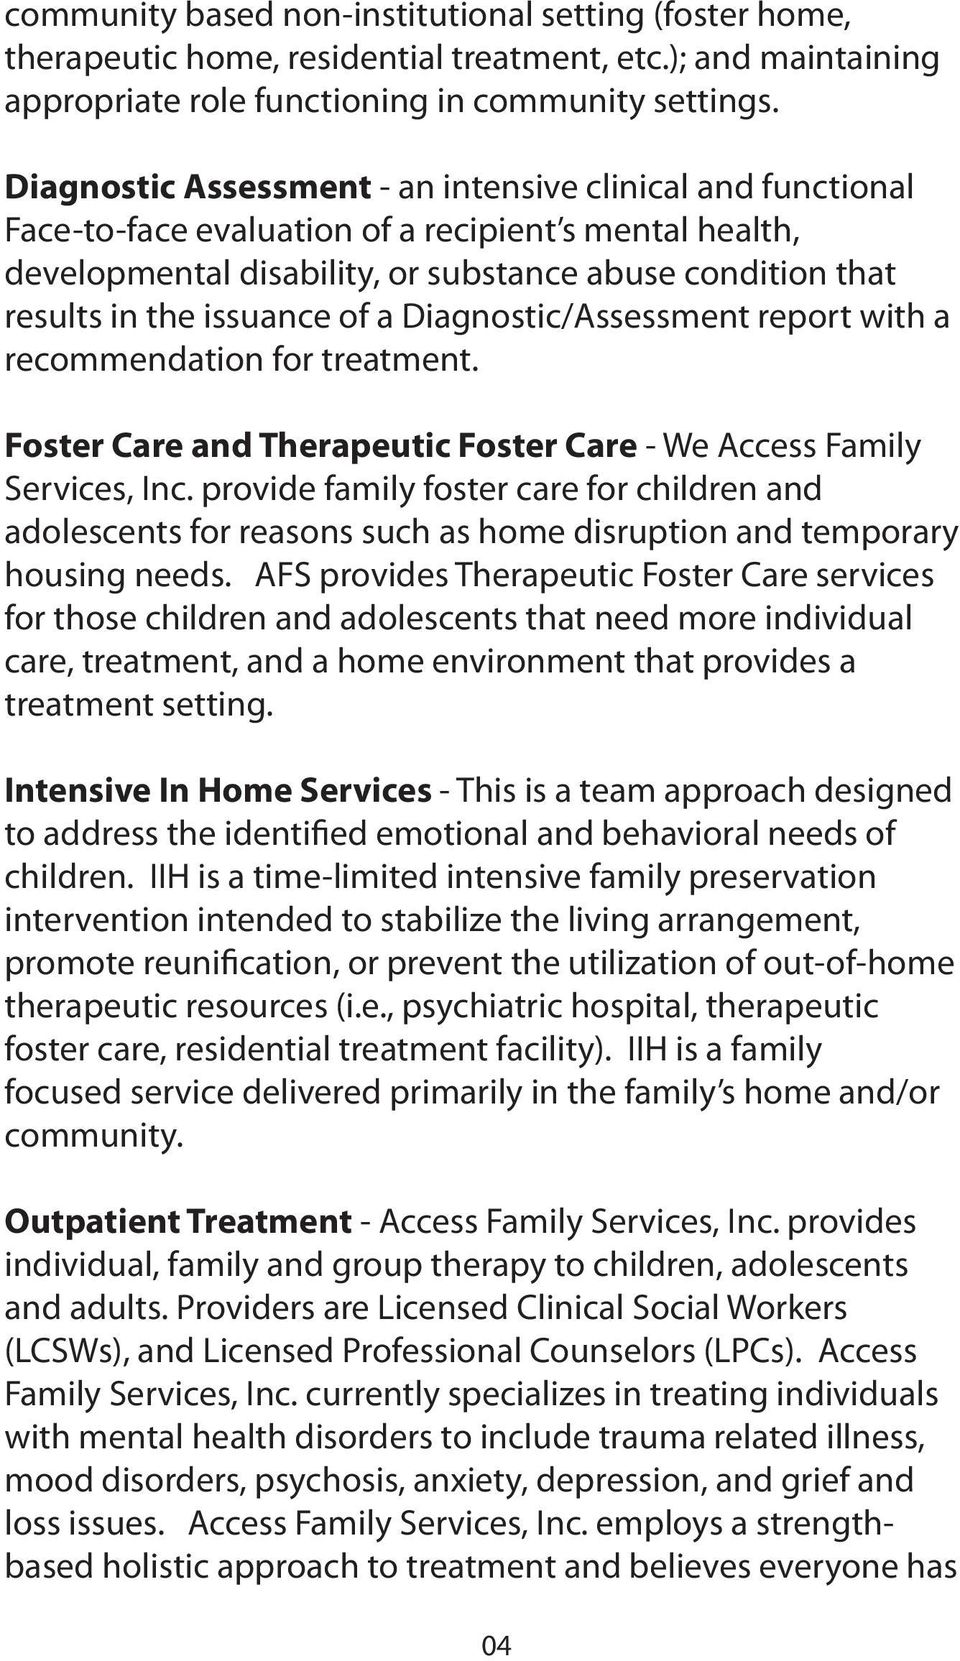 issuance of a Diagnostic/Assessment report with a recommendation for treatment. Foster Care and Therapeutic Foster Care - We Access Family Services, Inc.